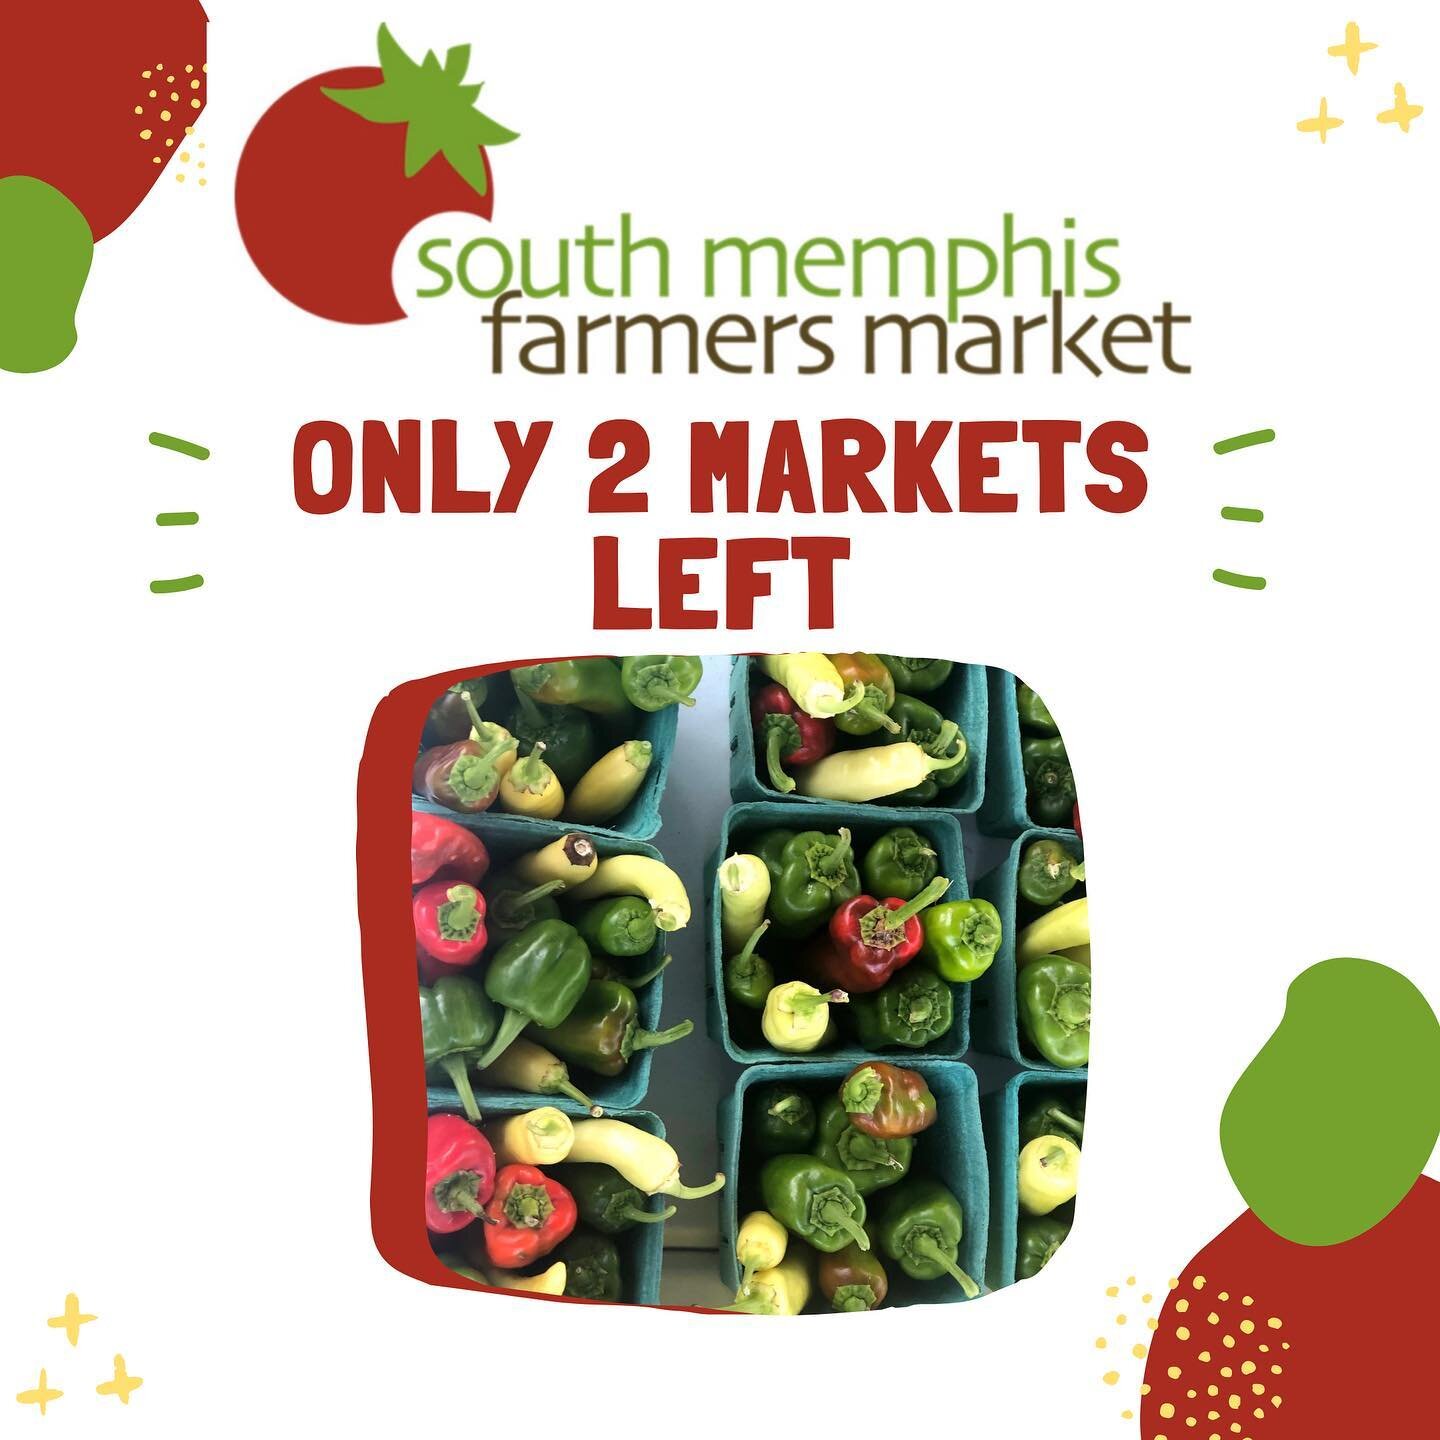 There are only TWO market days left in our June - September season! Come on out TOMORROW! The market will be open from 8:00 am - 1:00 pm!